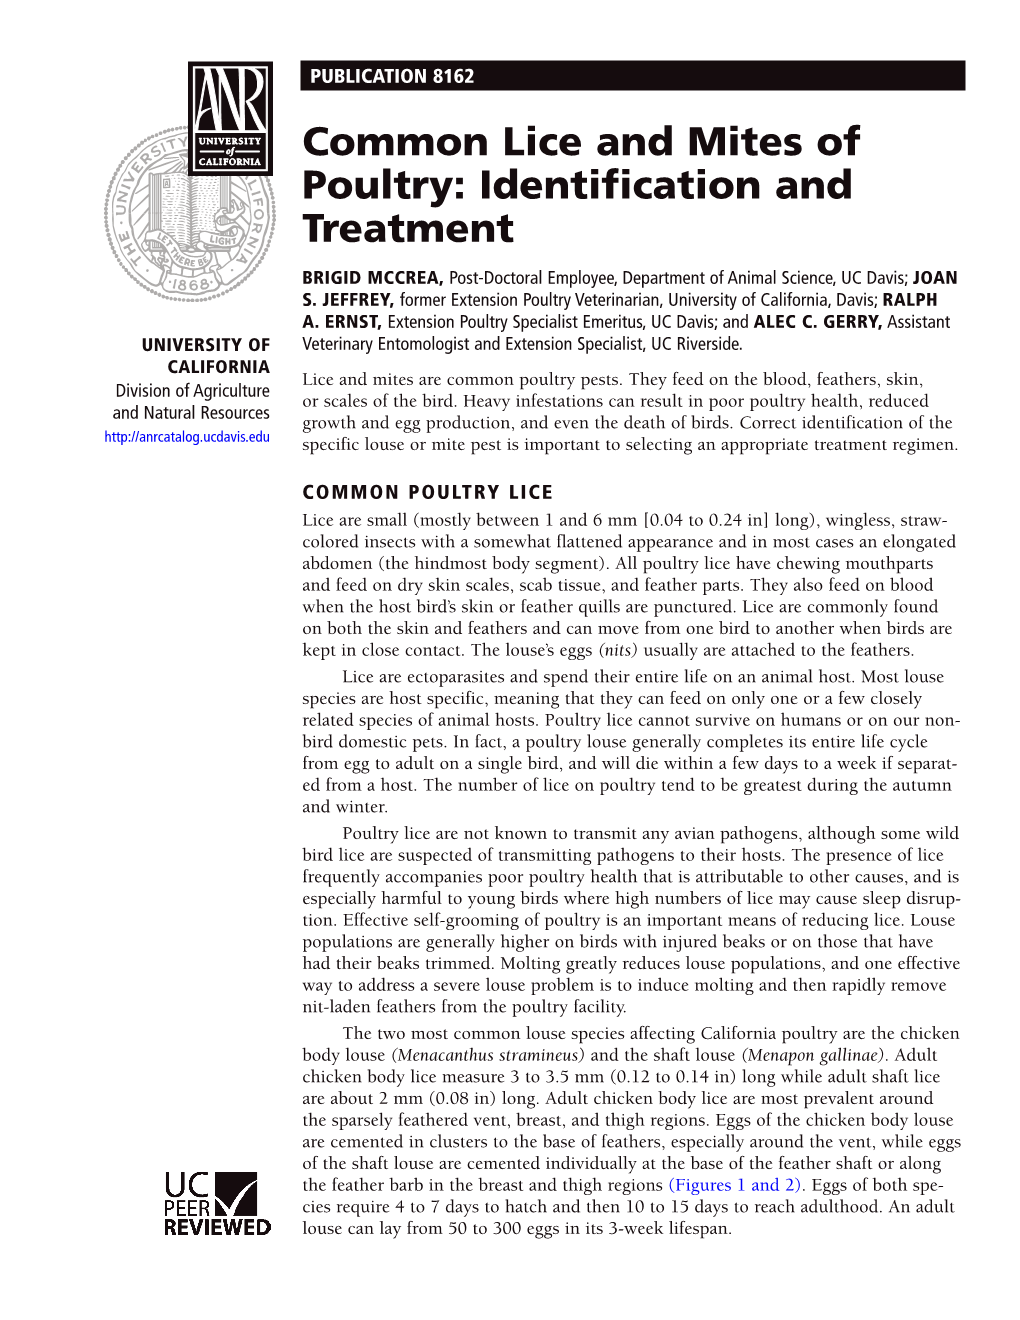 Common Lice and Mites of Poultry: Identification and Treatment